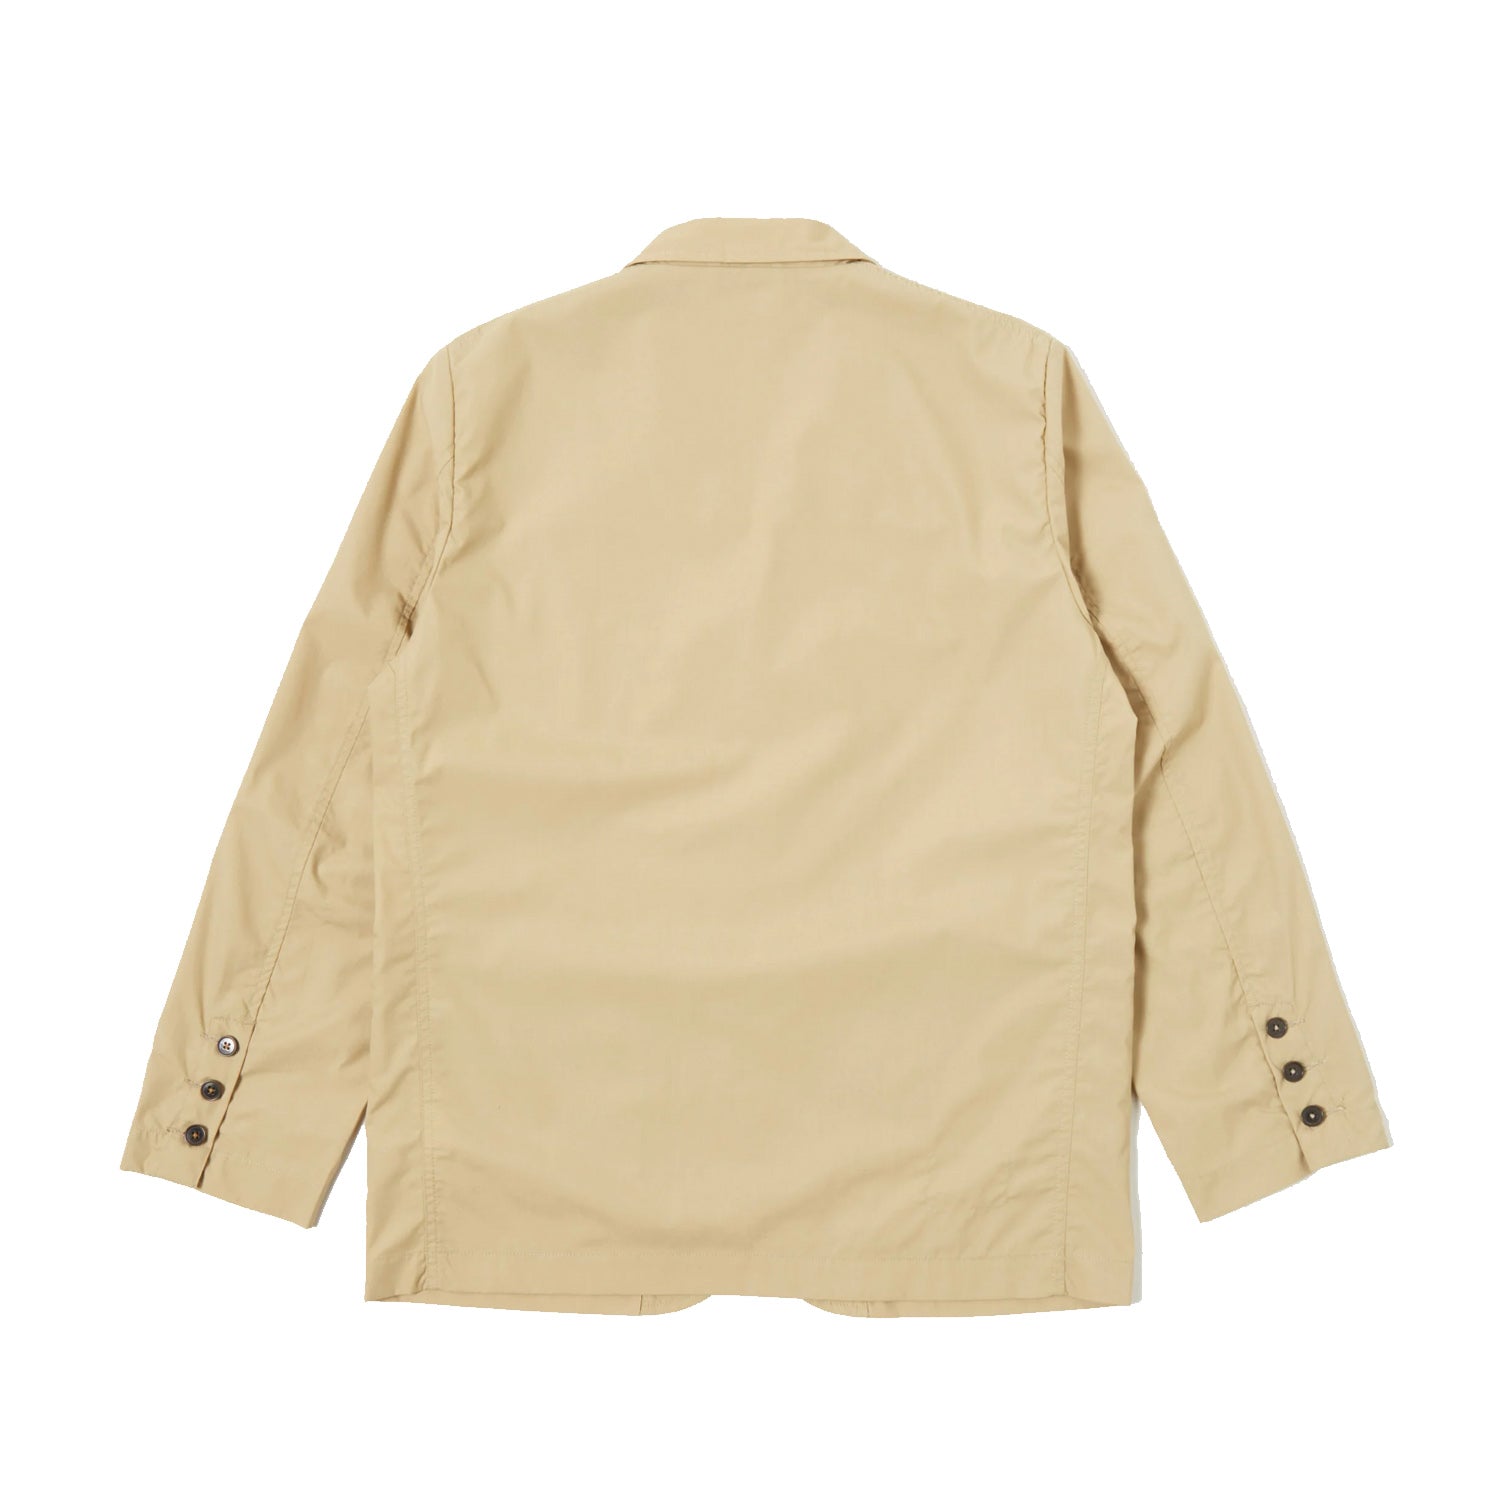 Capitol Jacket - Recycled Poly Tech